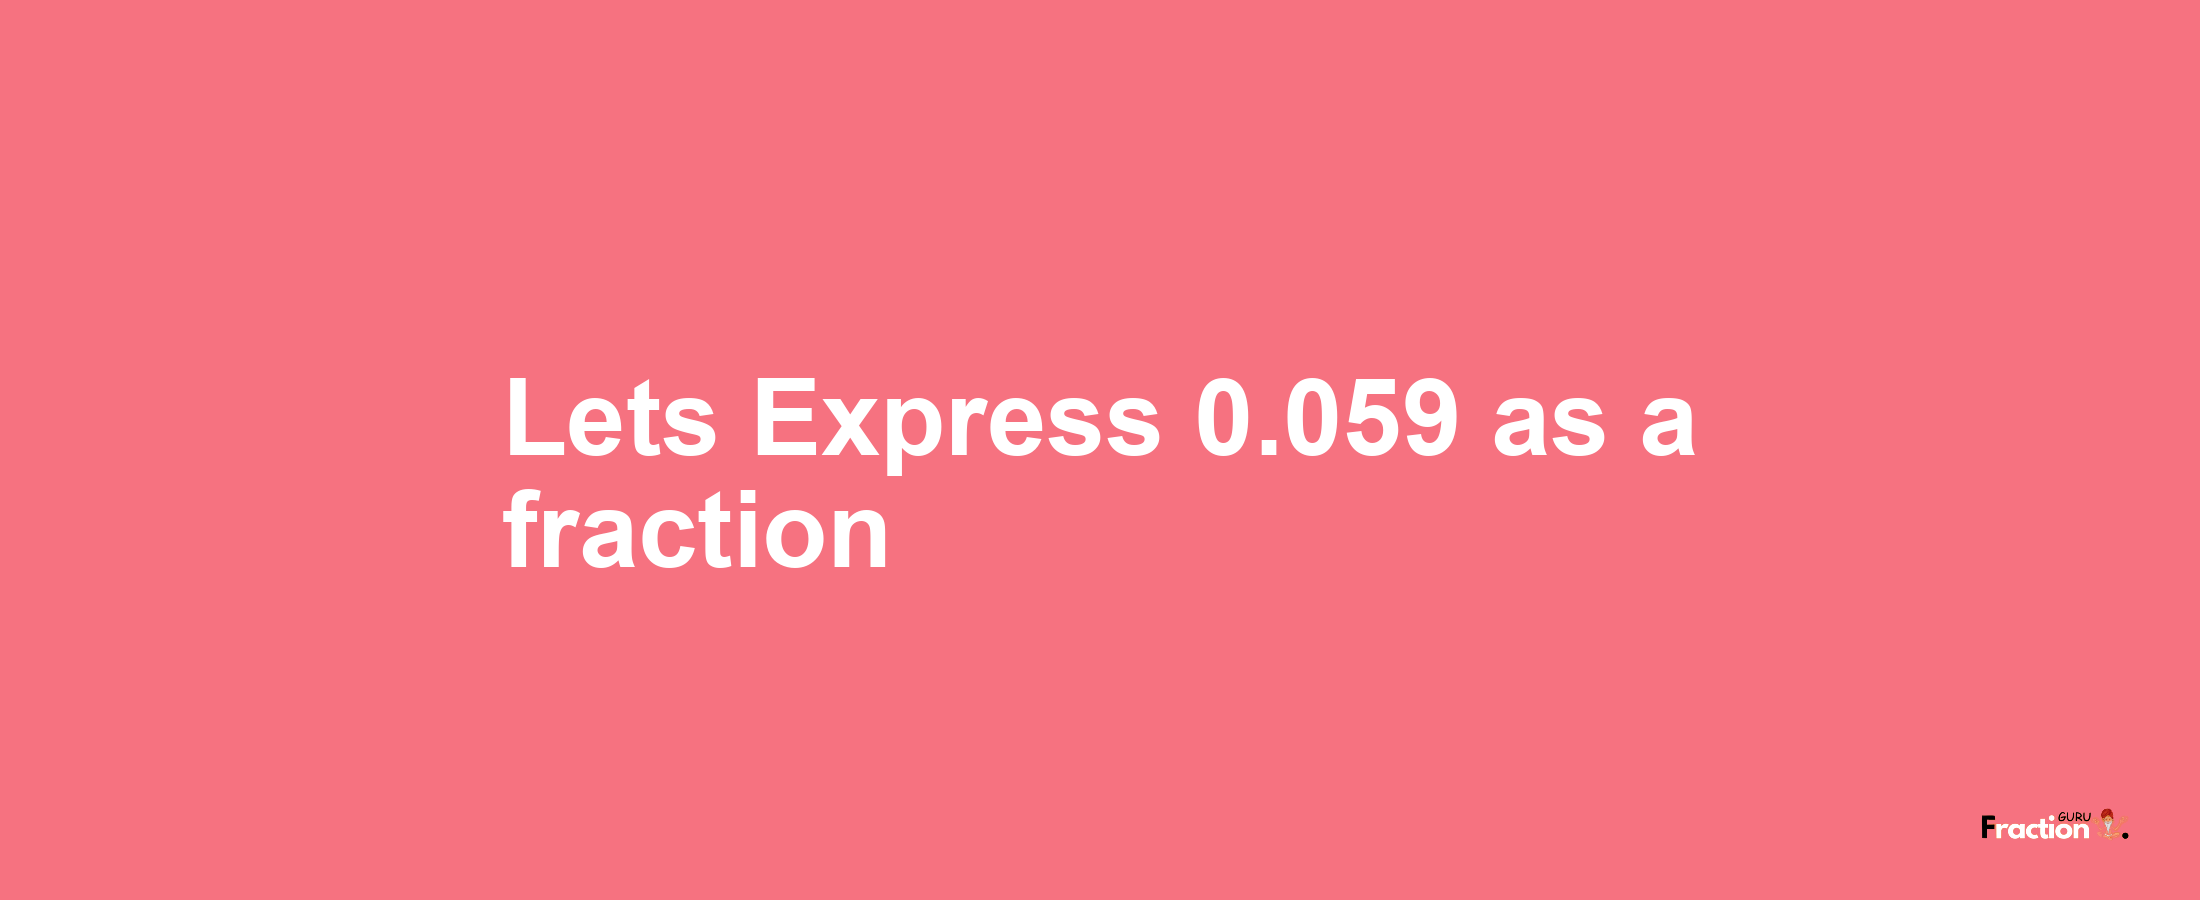 Lets Express 0.059 as afraction